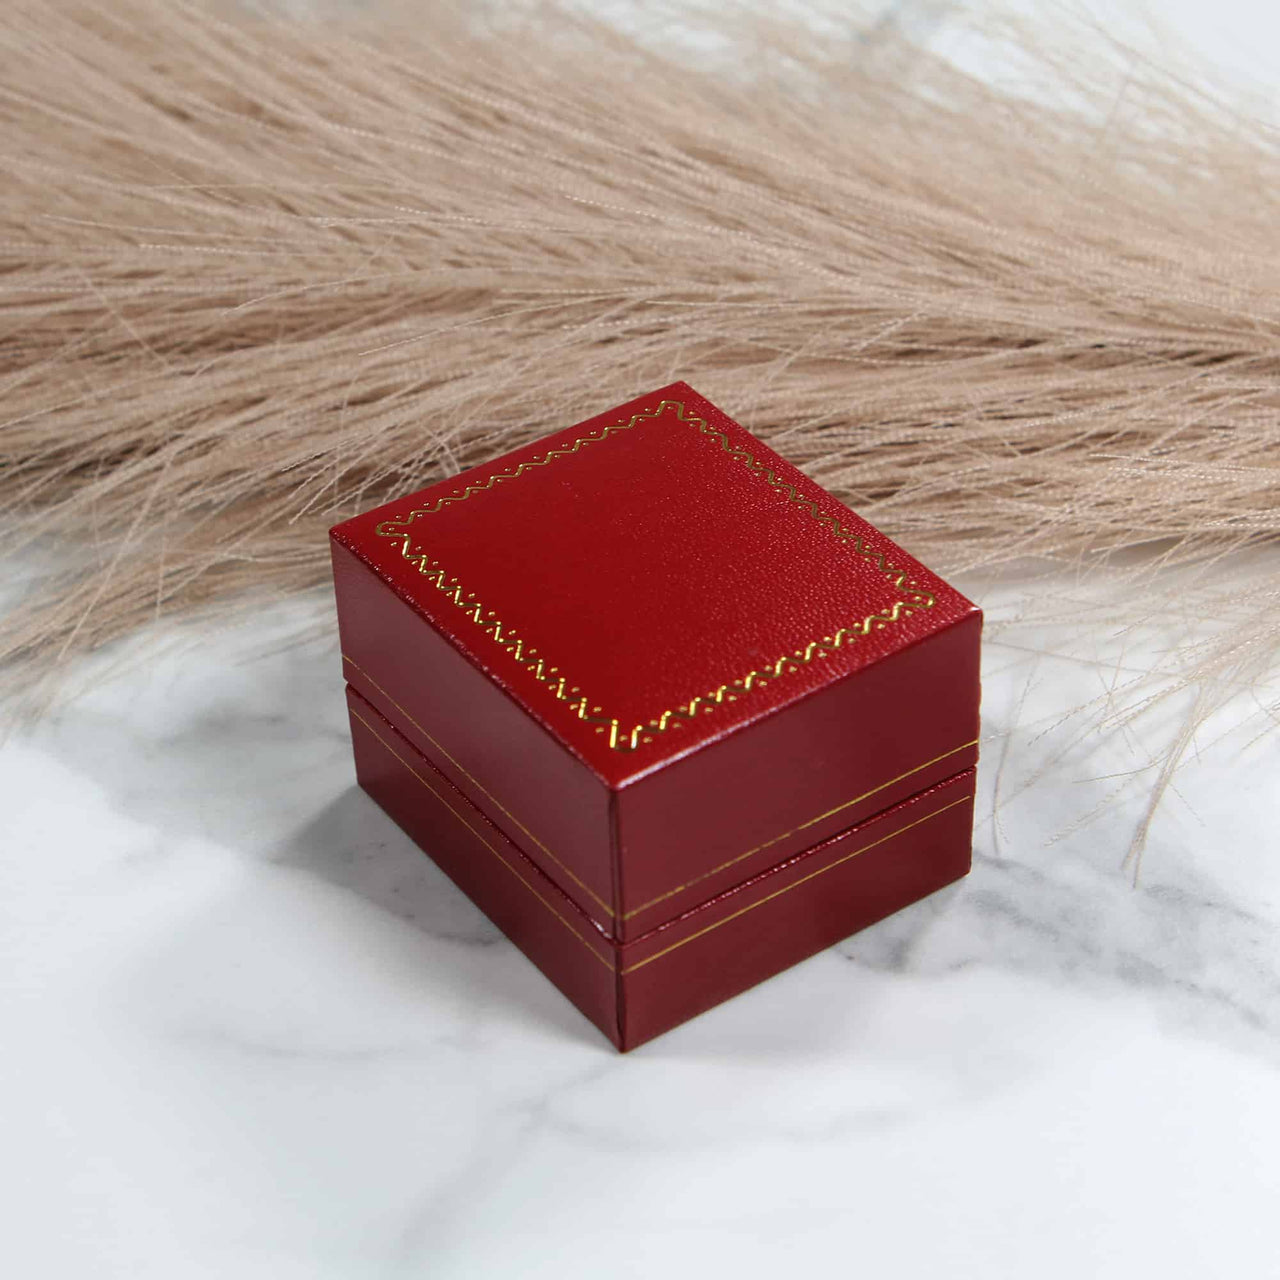 Classic red ring box can be used for your proposals, engagments,weddings. This ring box was inspired from cartier ring box. The red color of this ring box is a classic and can be used for any special event